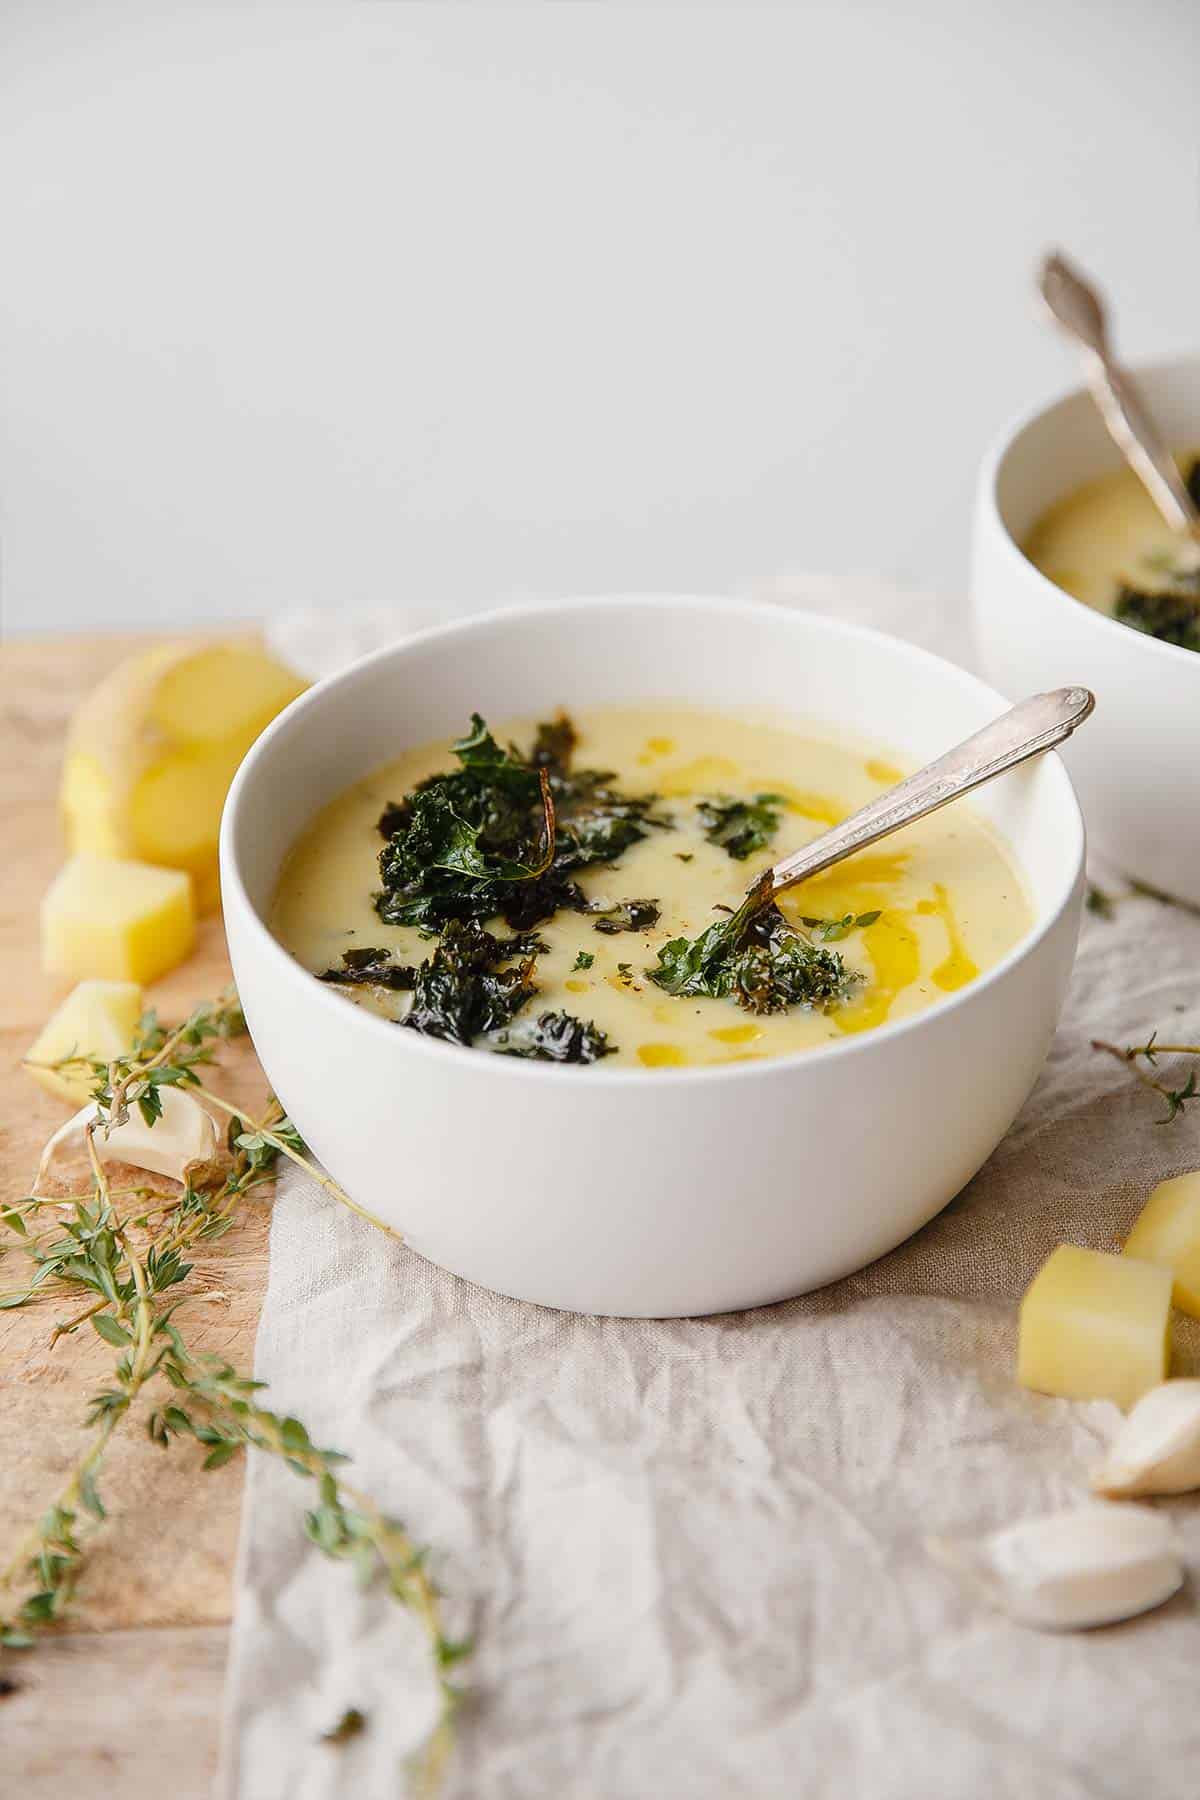 A bowl of potato and kale soup on the table with a spoon in it and thyme leaves, cheese, and garlic around the bowl on the table.